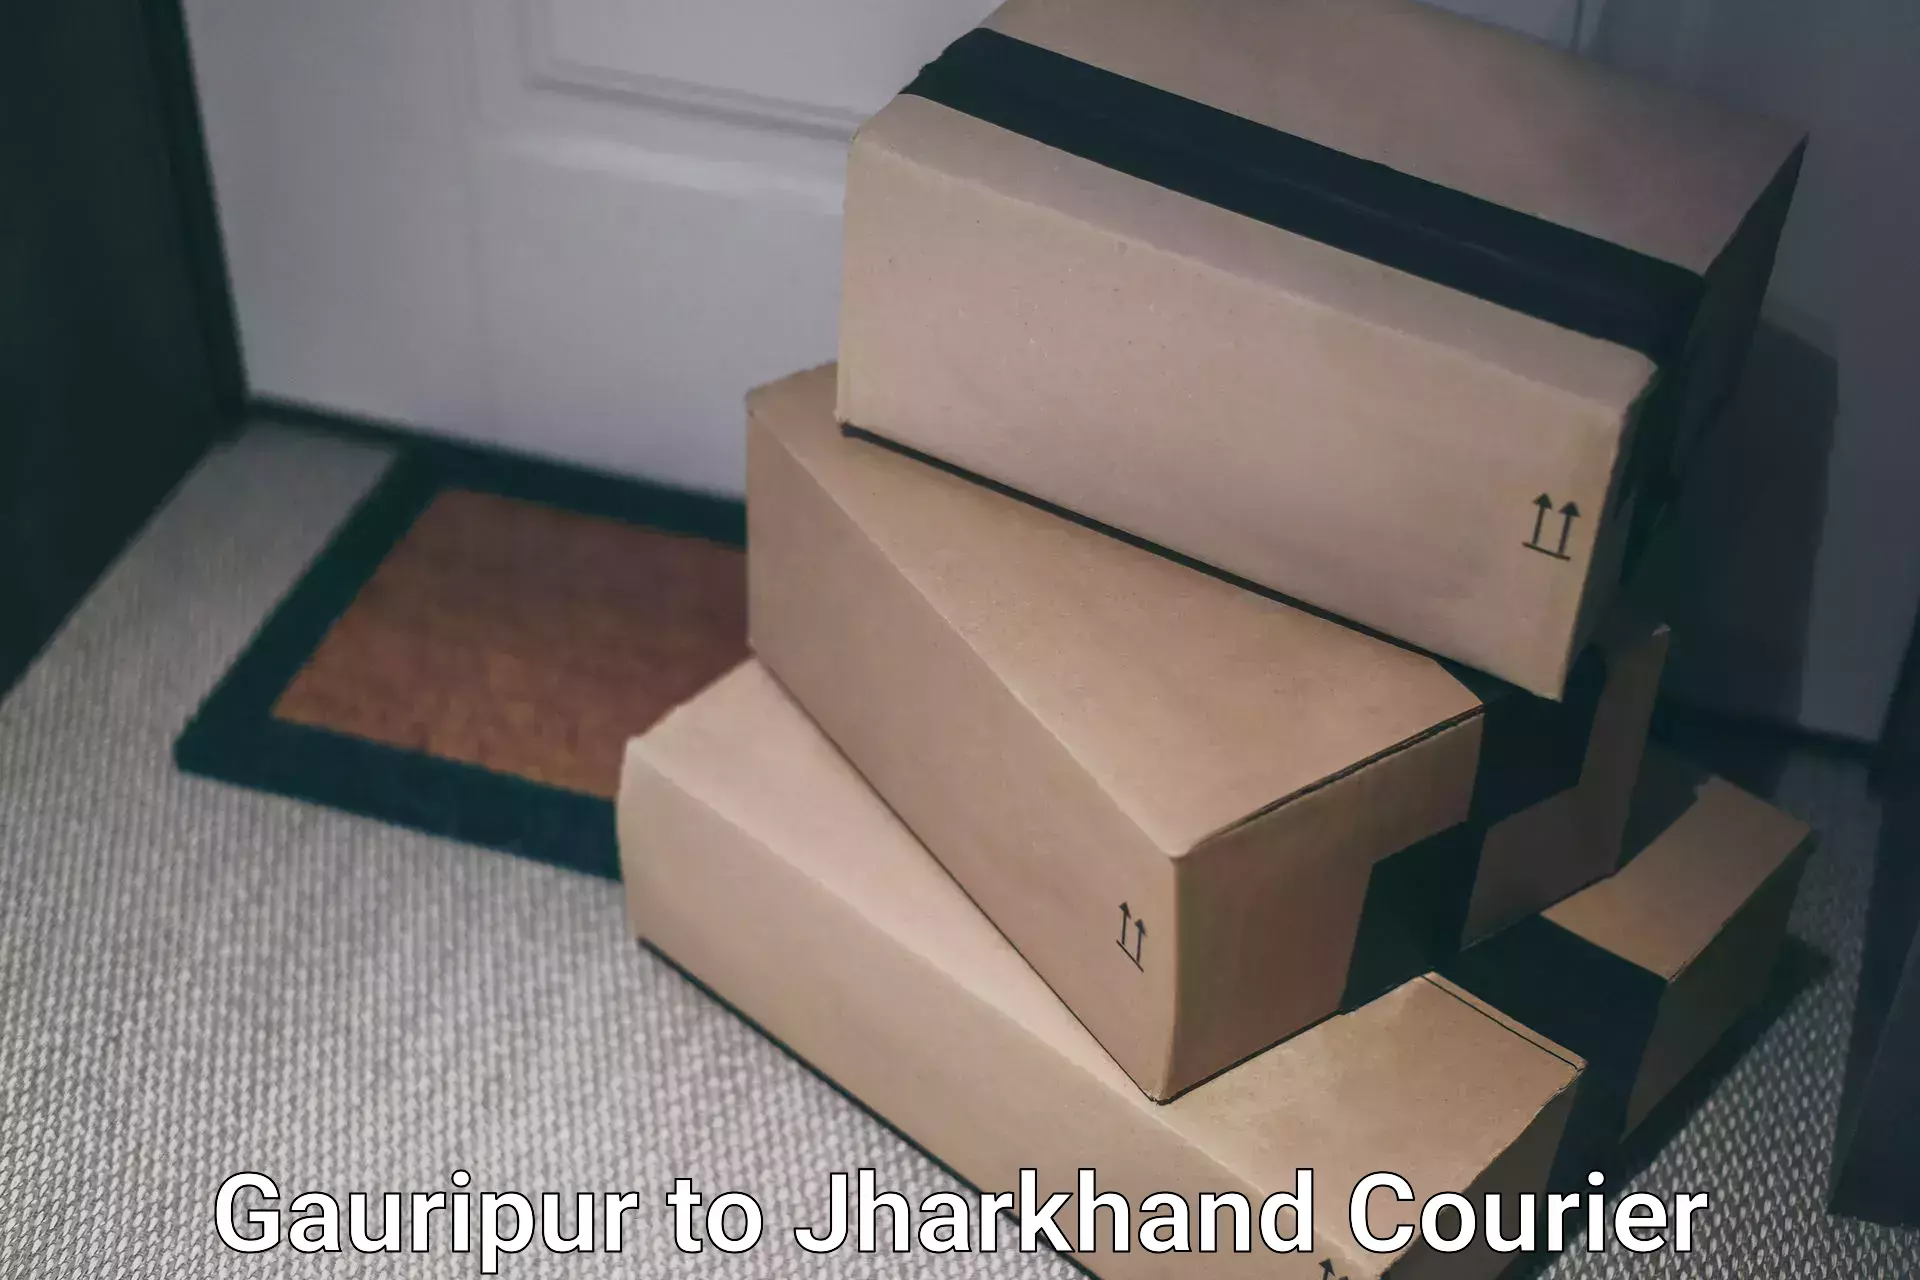 Pharmaceutical courier Gauripur to Dhanbad